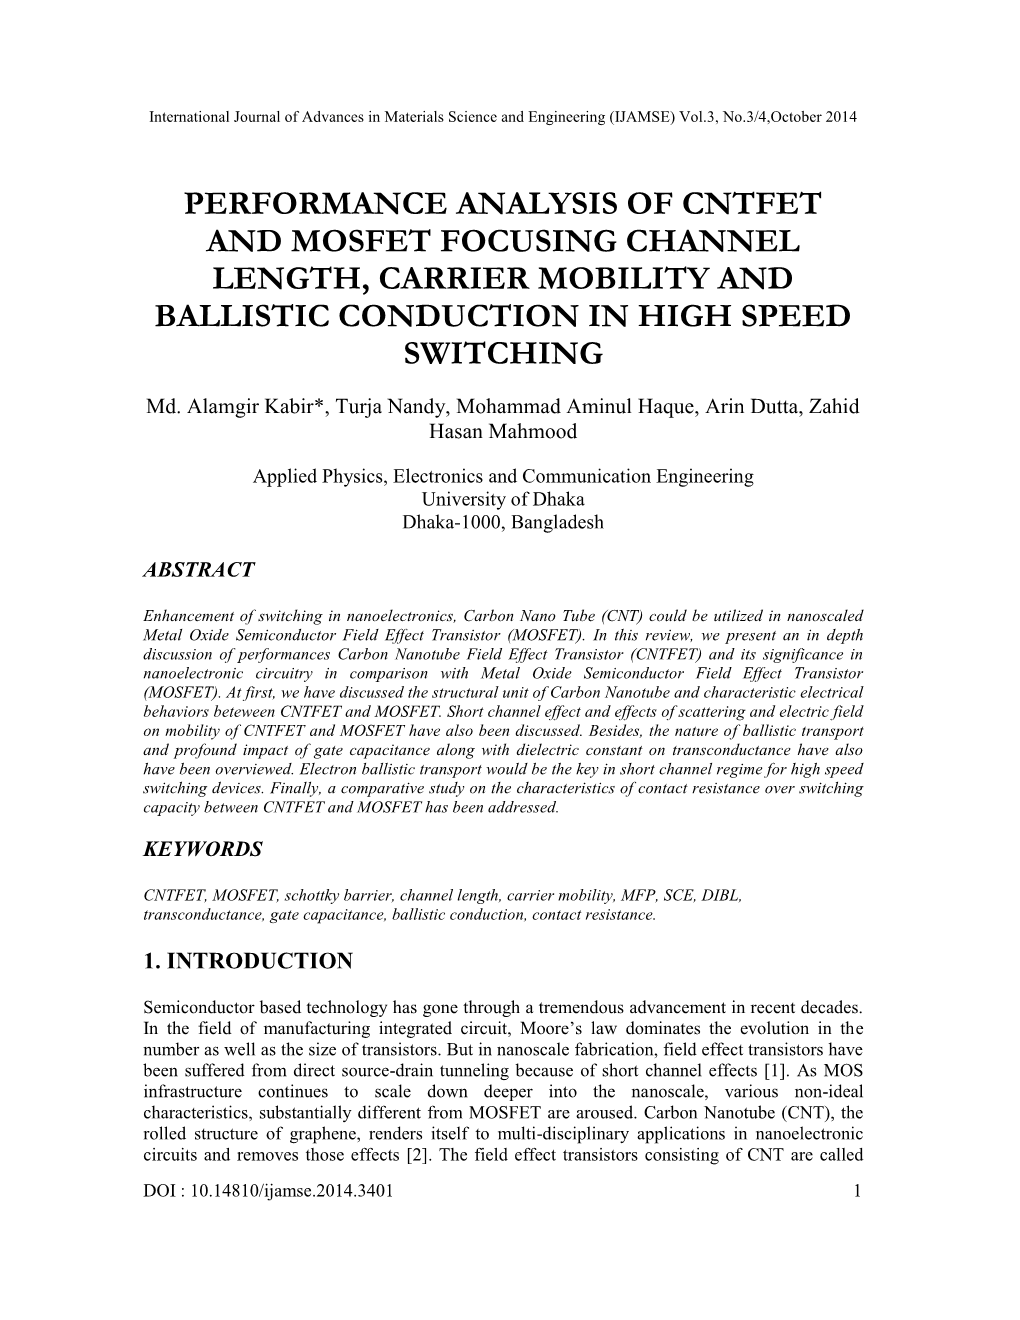 PERFORMANCE ANALYSIS of CNTFET and MOSFET FOCUSING CHANNEL LENGTH, CARRIER MOBILITY and BALLISTIC CONDUCTION in HIGH SPEED SWITCHING Md